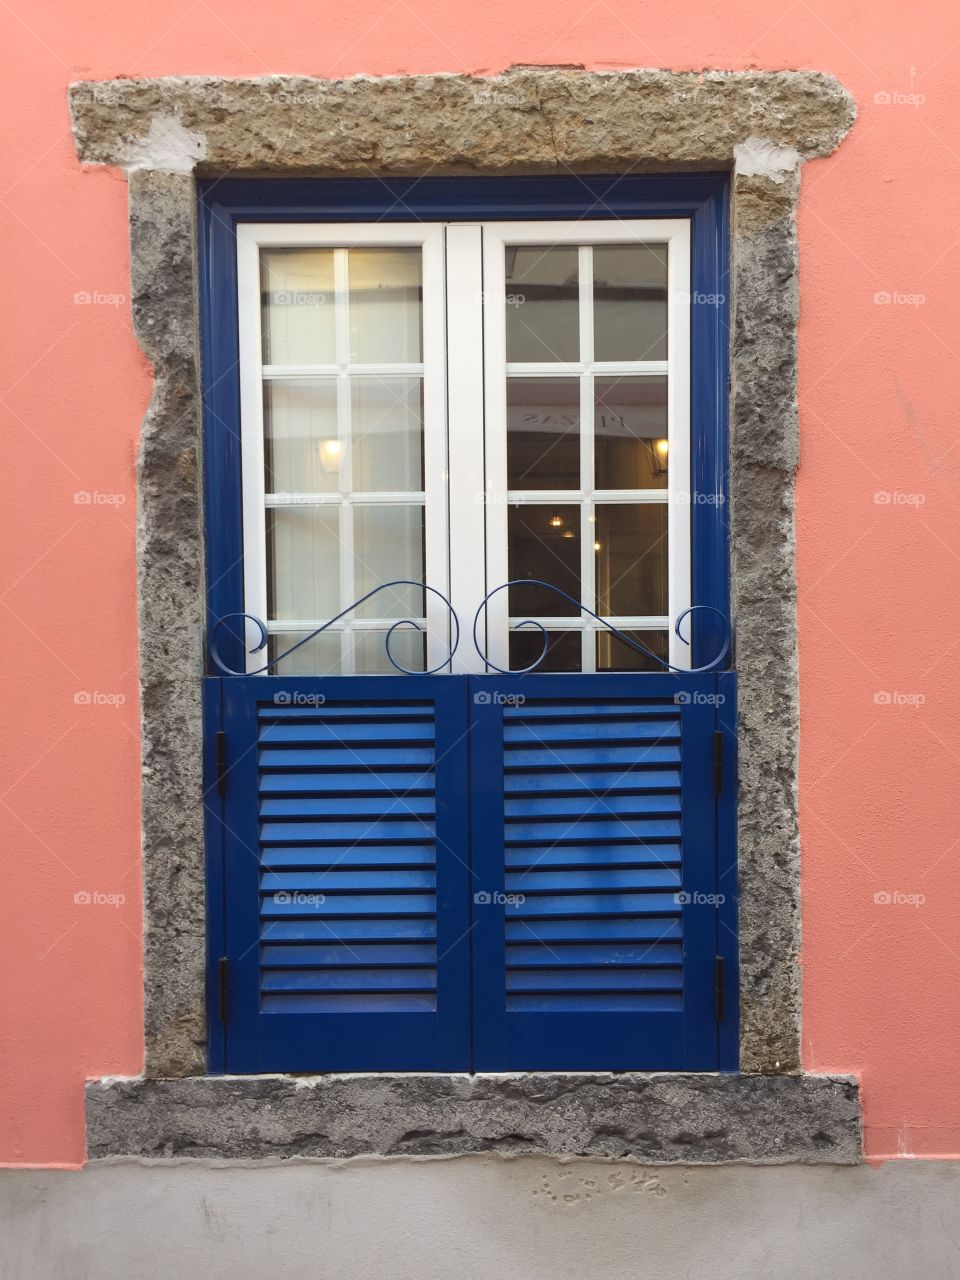 Window of a house in Portugal, Cascaïs